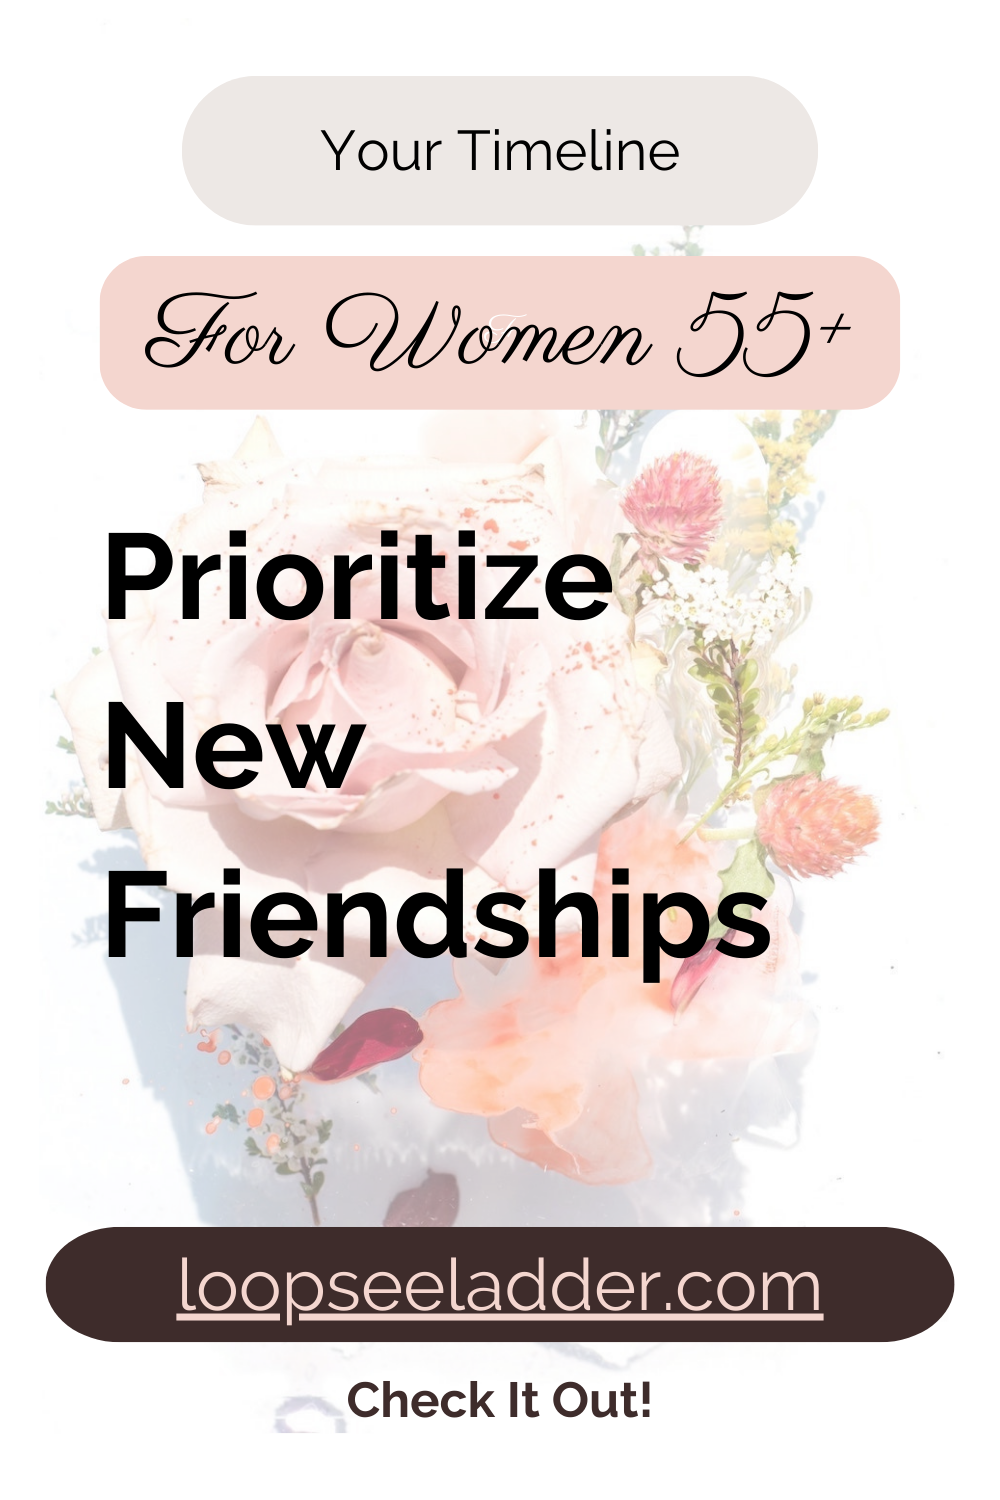 Why Women Over 55 Should Prioritize New Friendships